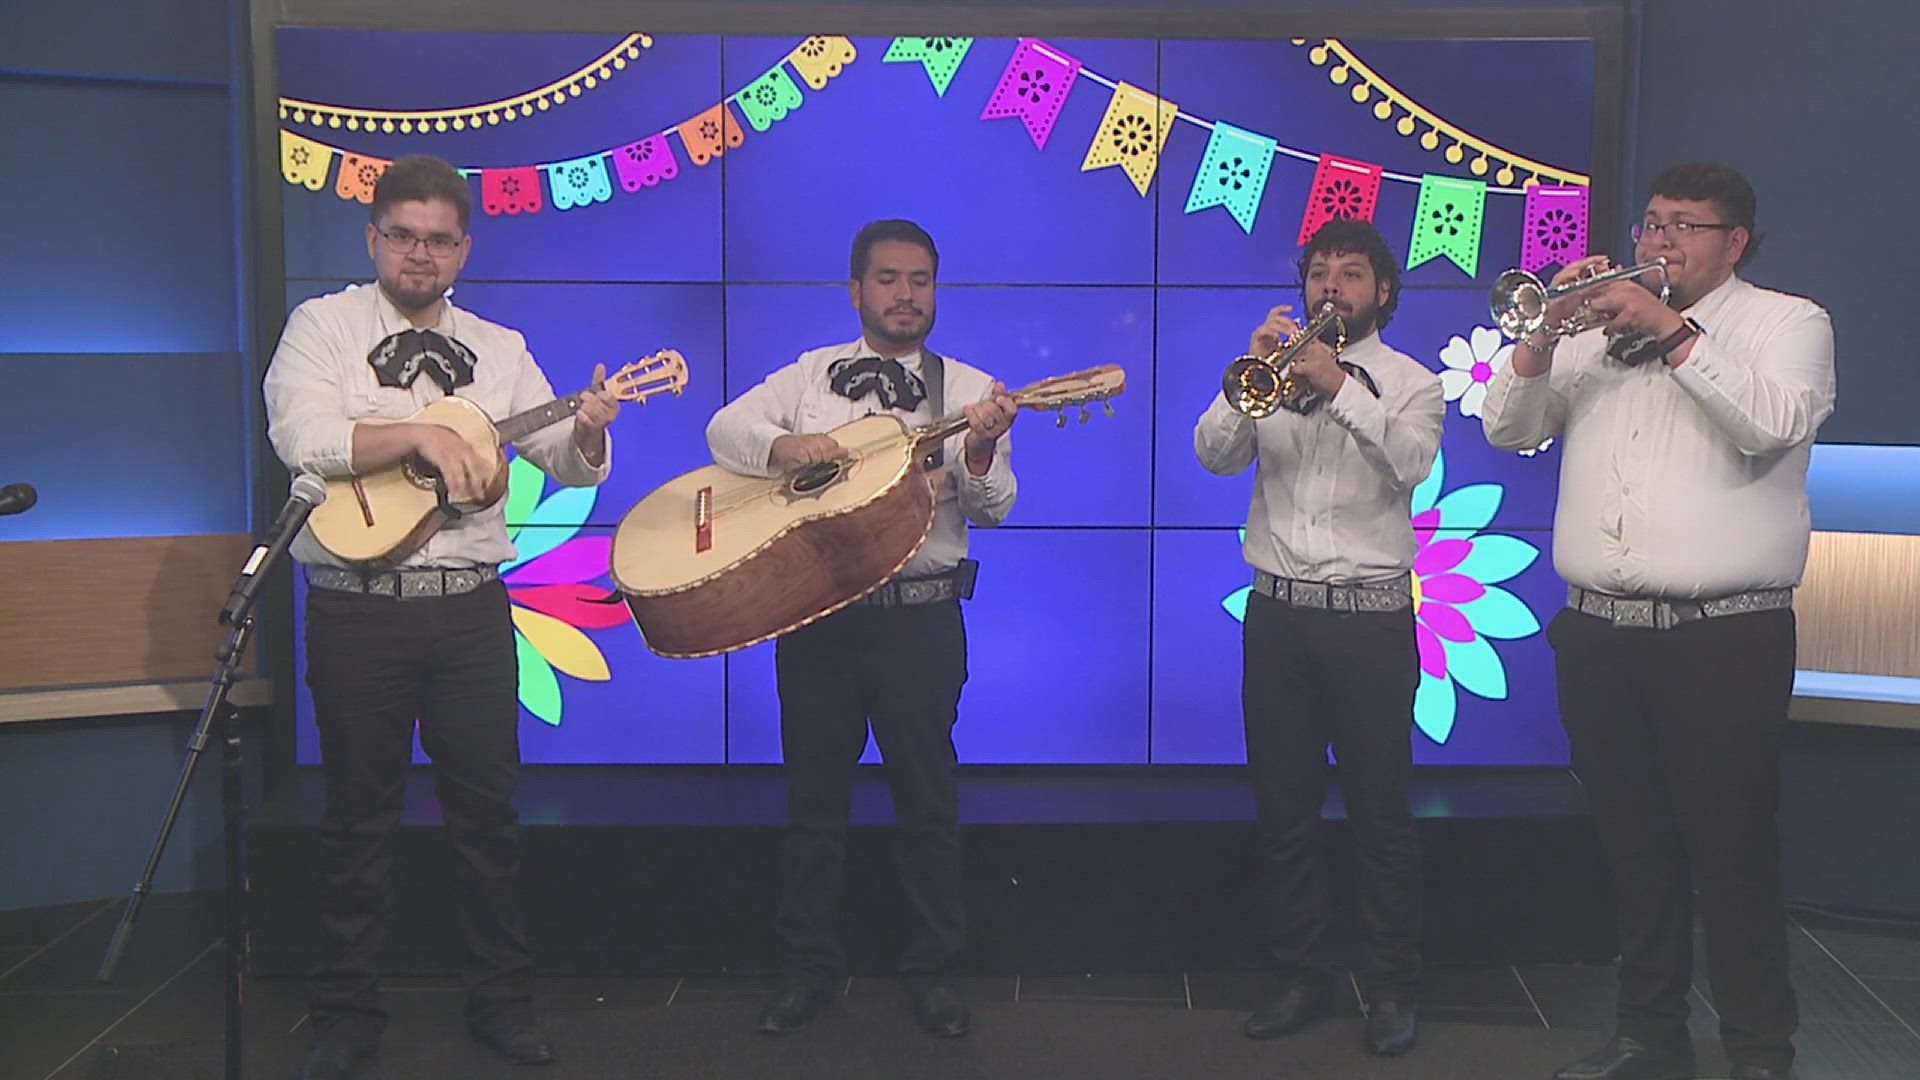 Adrian Segovia and other members of "Mariachi Proyecto" stop by Midday to share their music and experiences in SETX ahead of the Cinco de Mayo holiday.